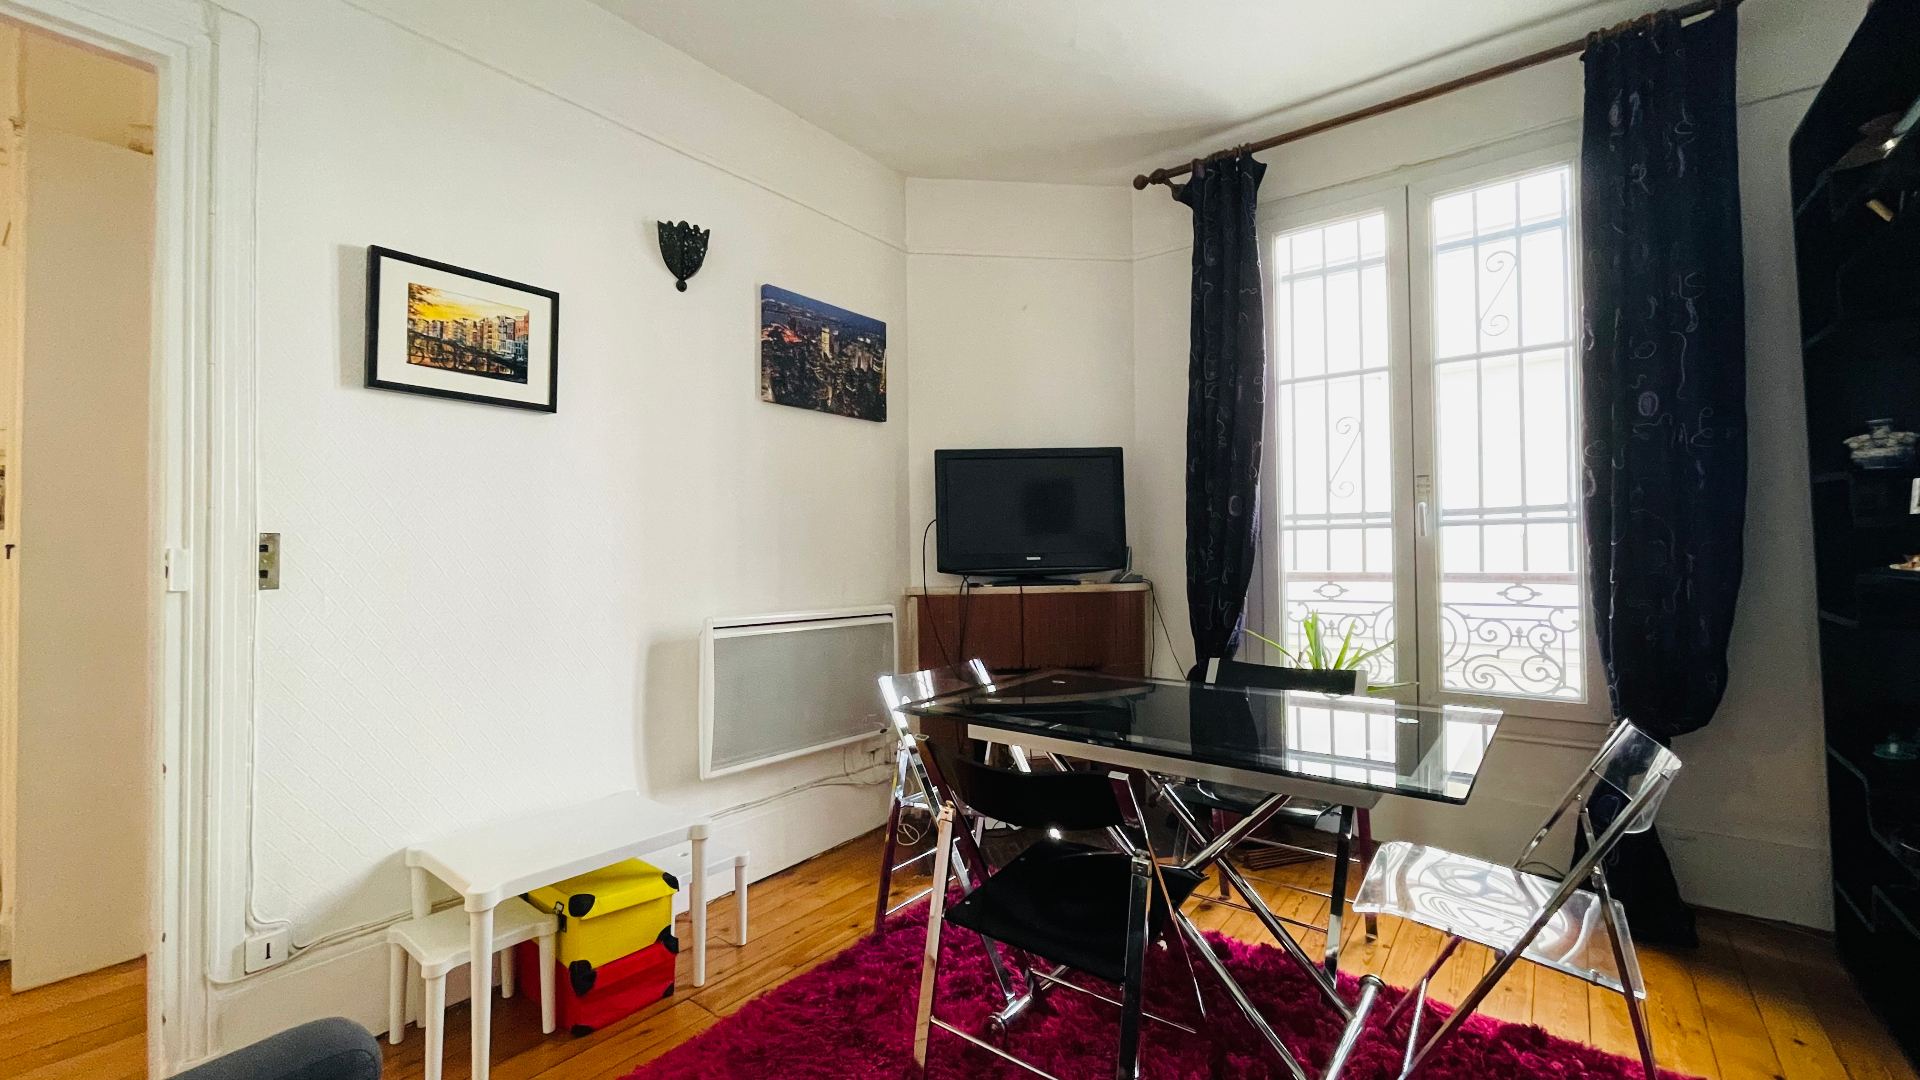 Beautiful 2 rooms in the middle of Montmartre, rue Feutrier, 50 meters from the Sacré-Coeur gardens! 2